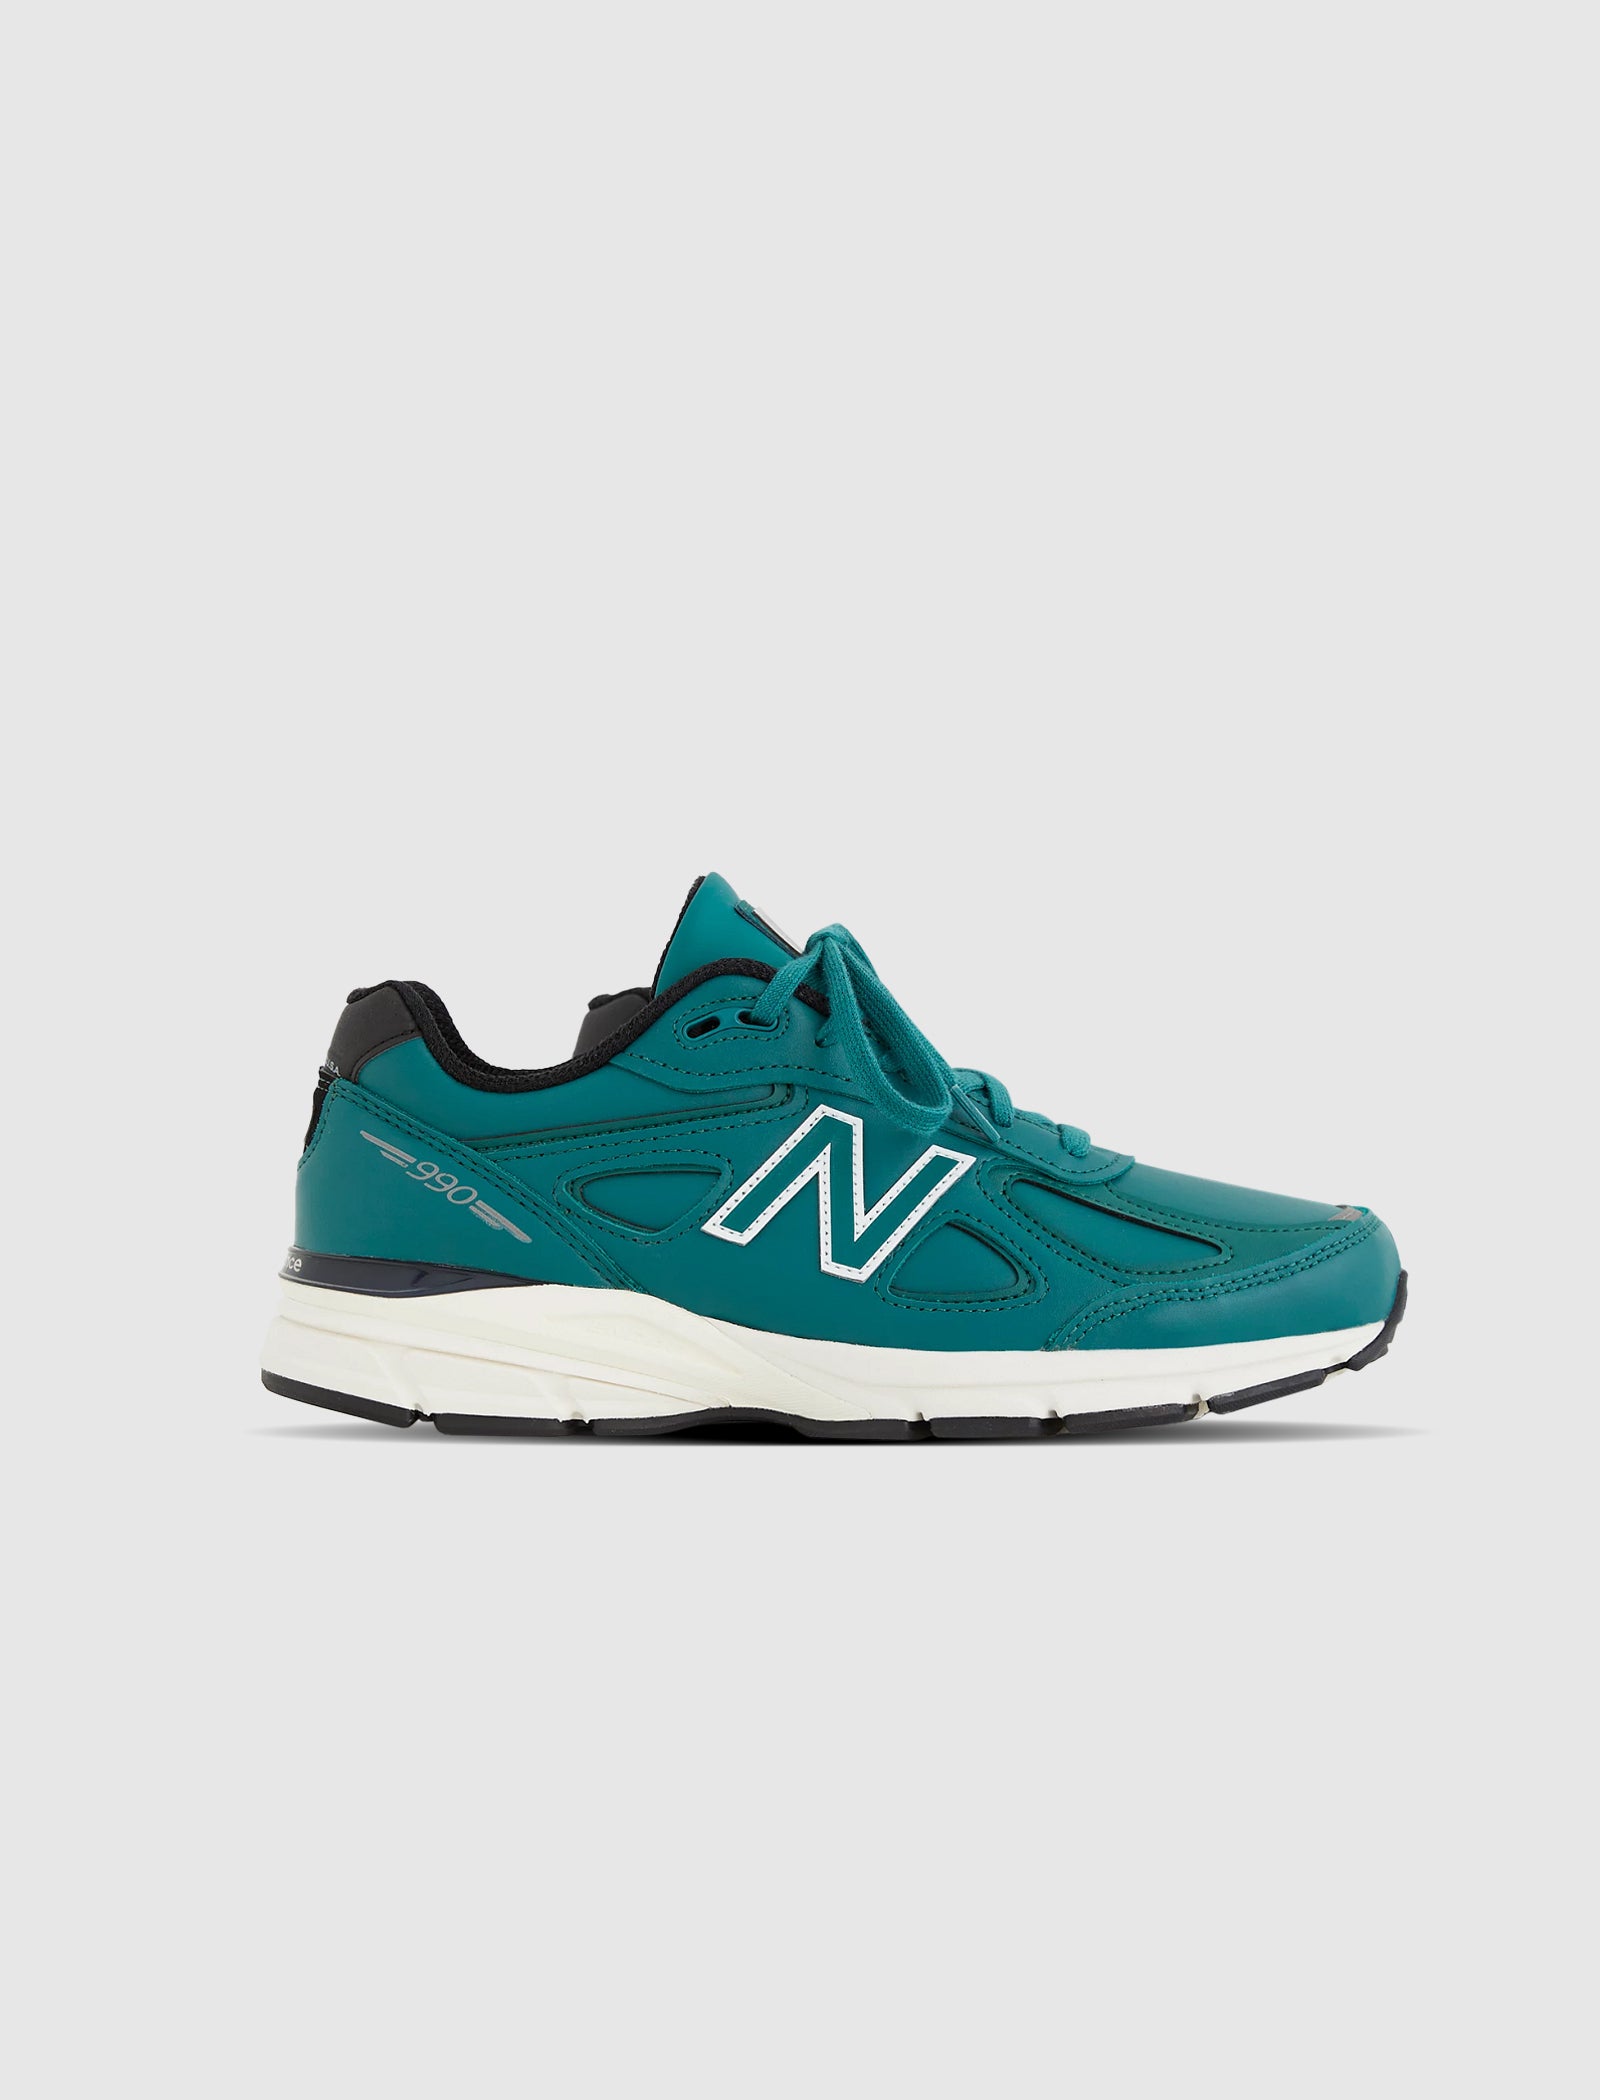 990v4 MADE IN USA "TEAL"